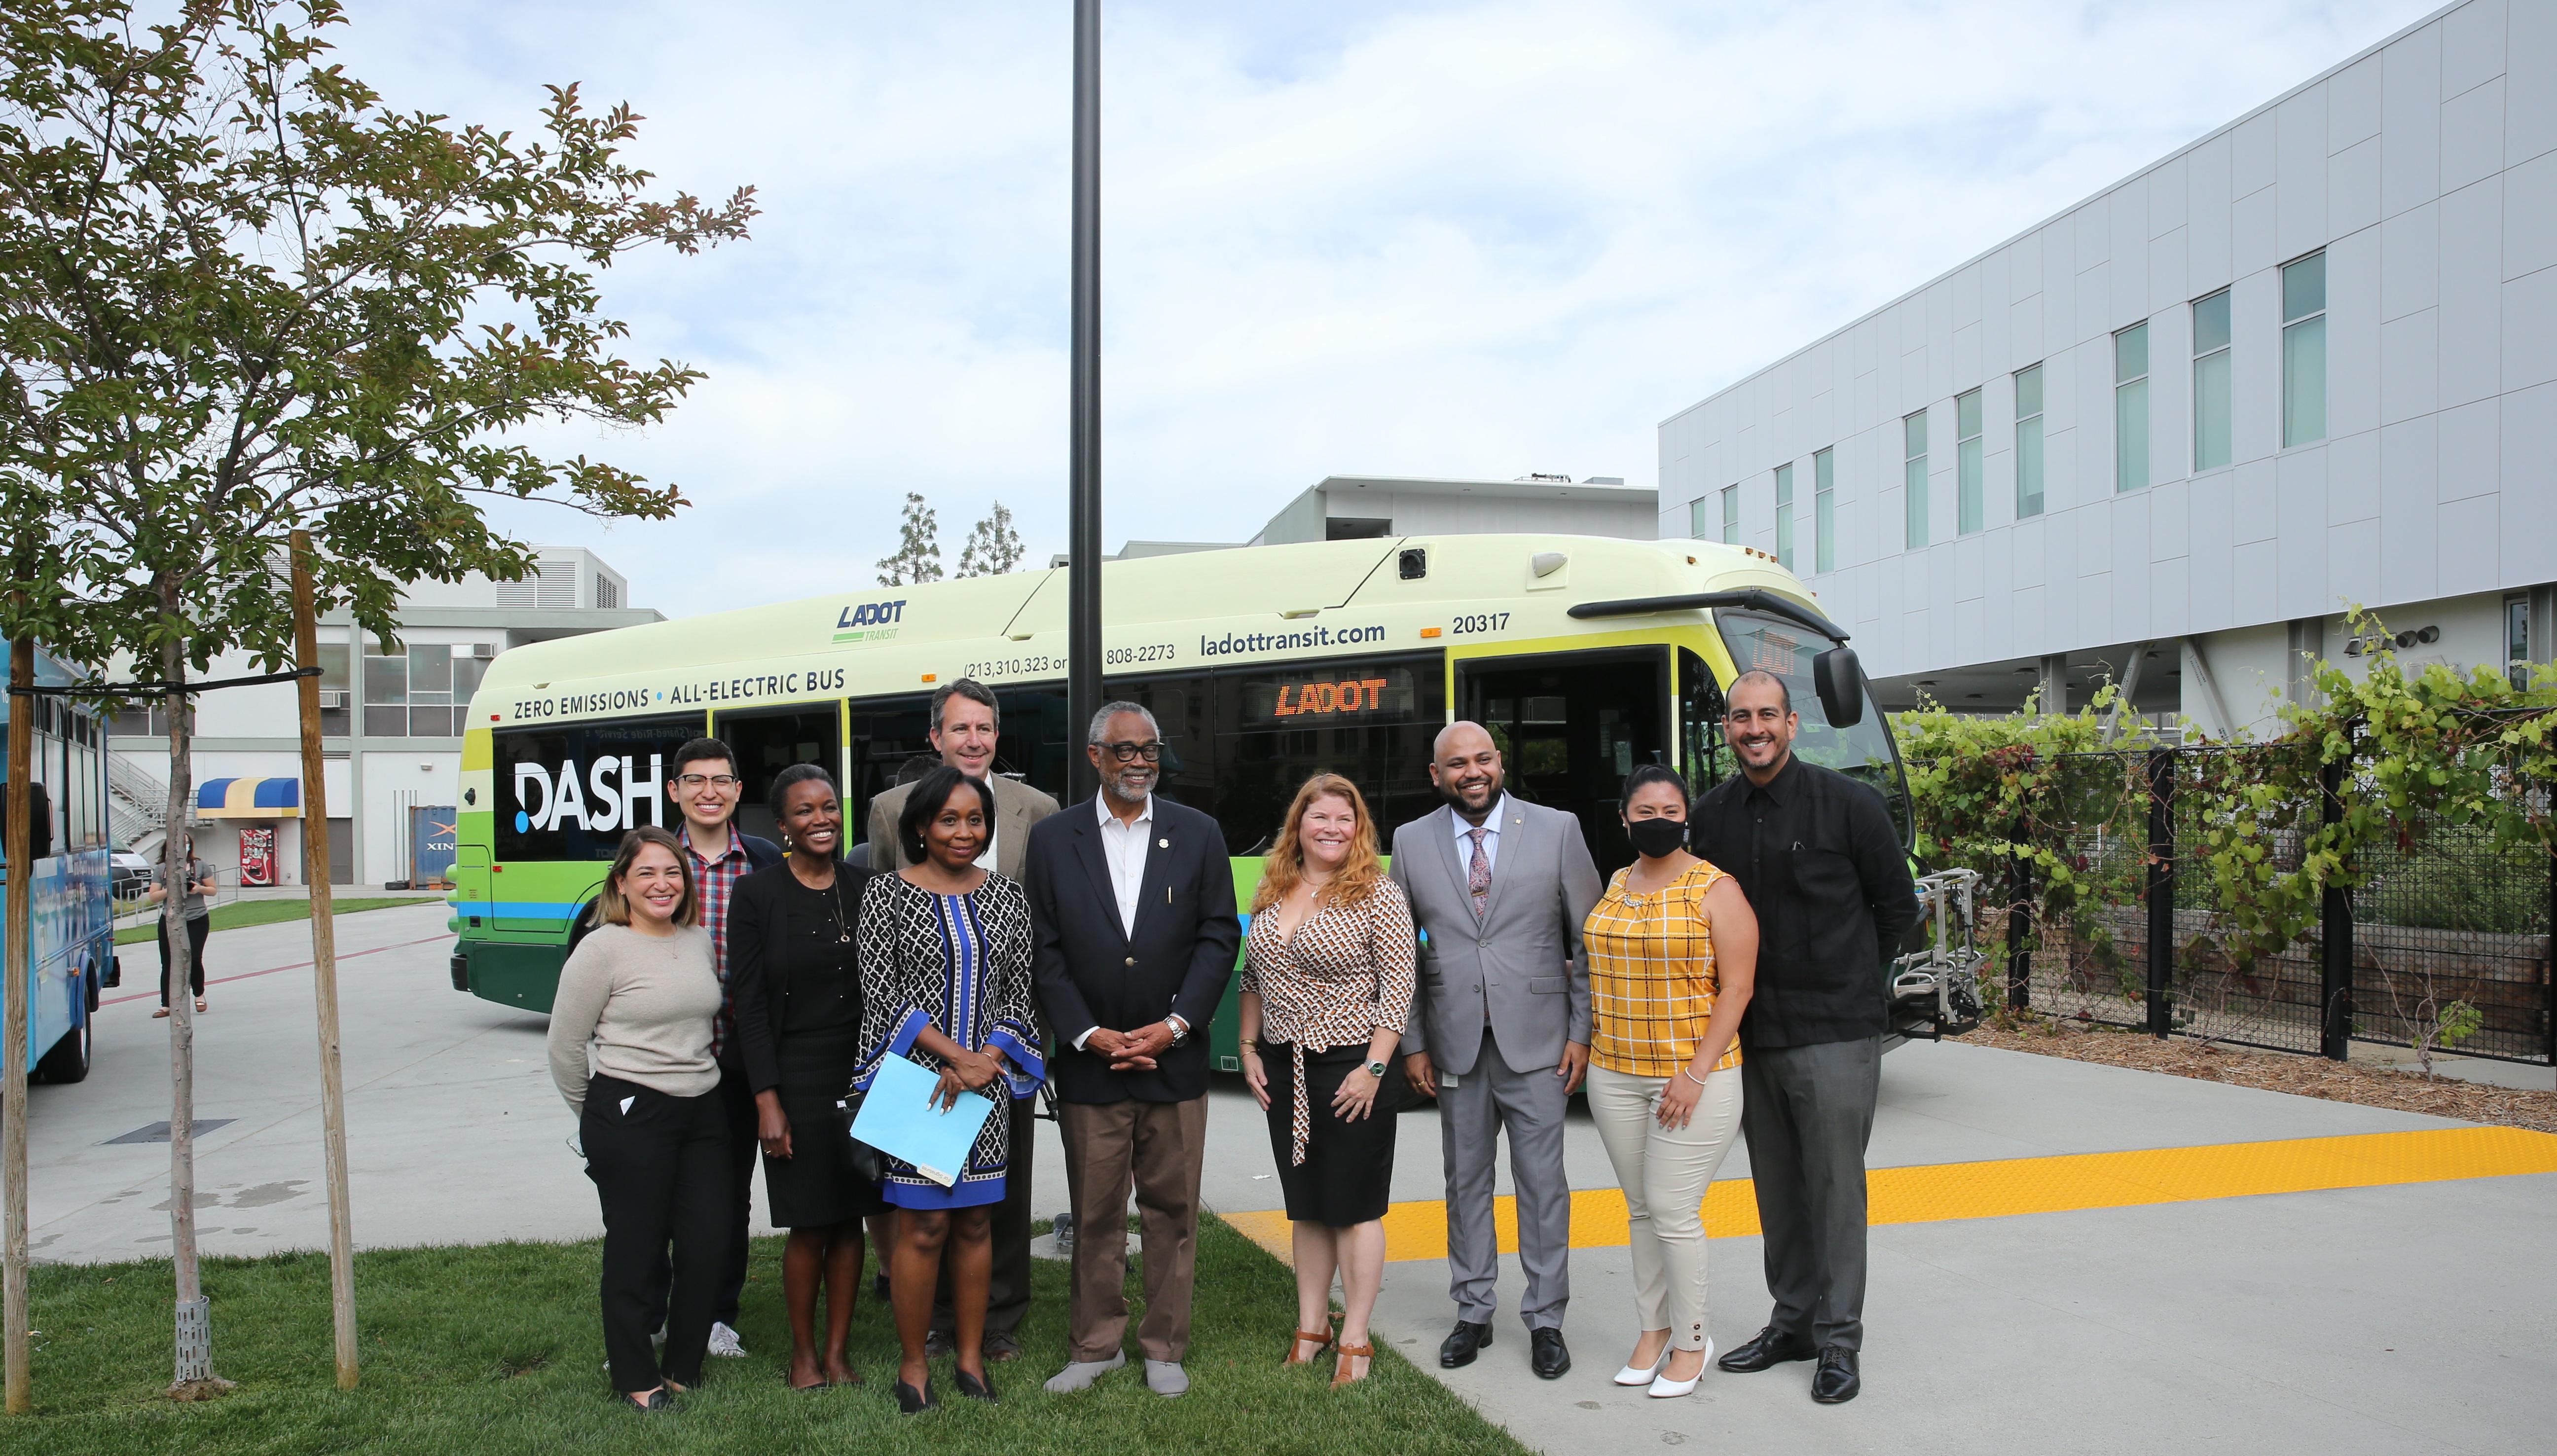 Event participants standing in front of an electric bus